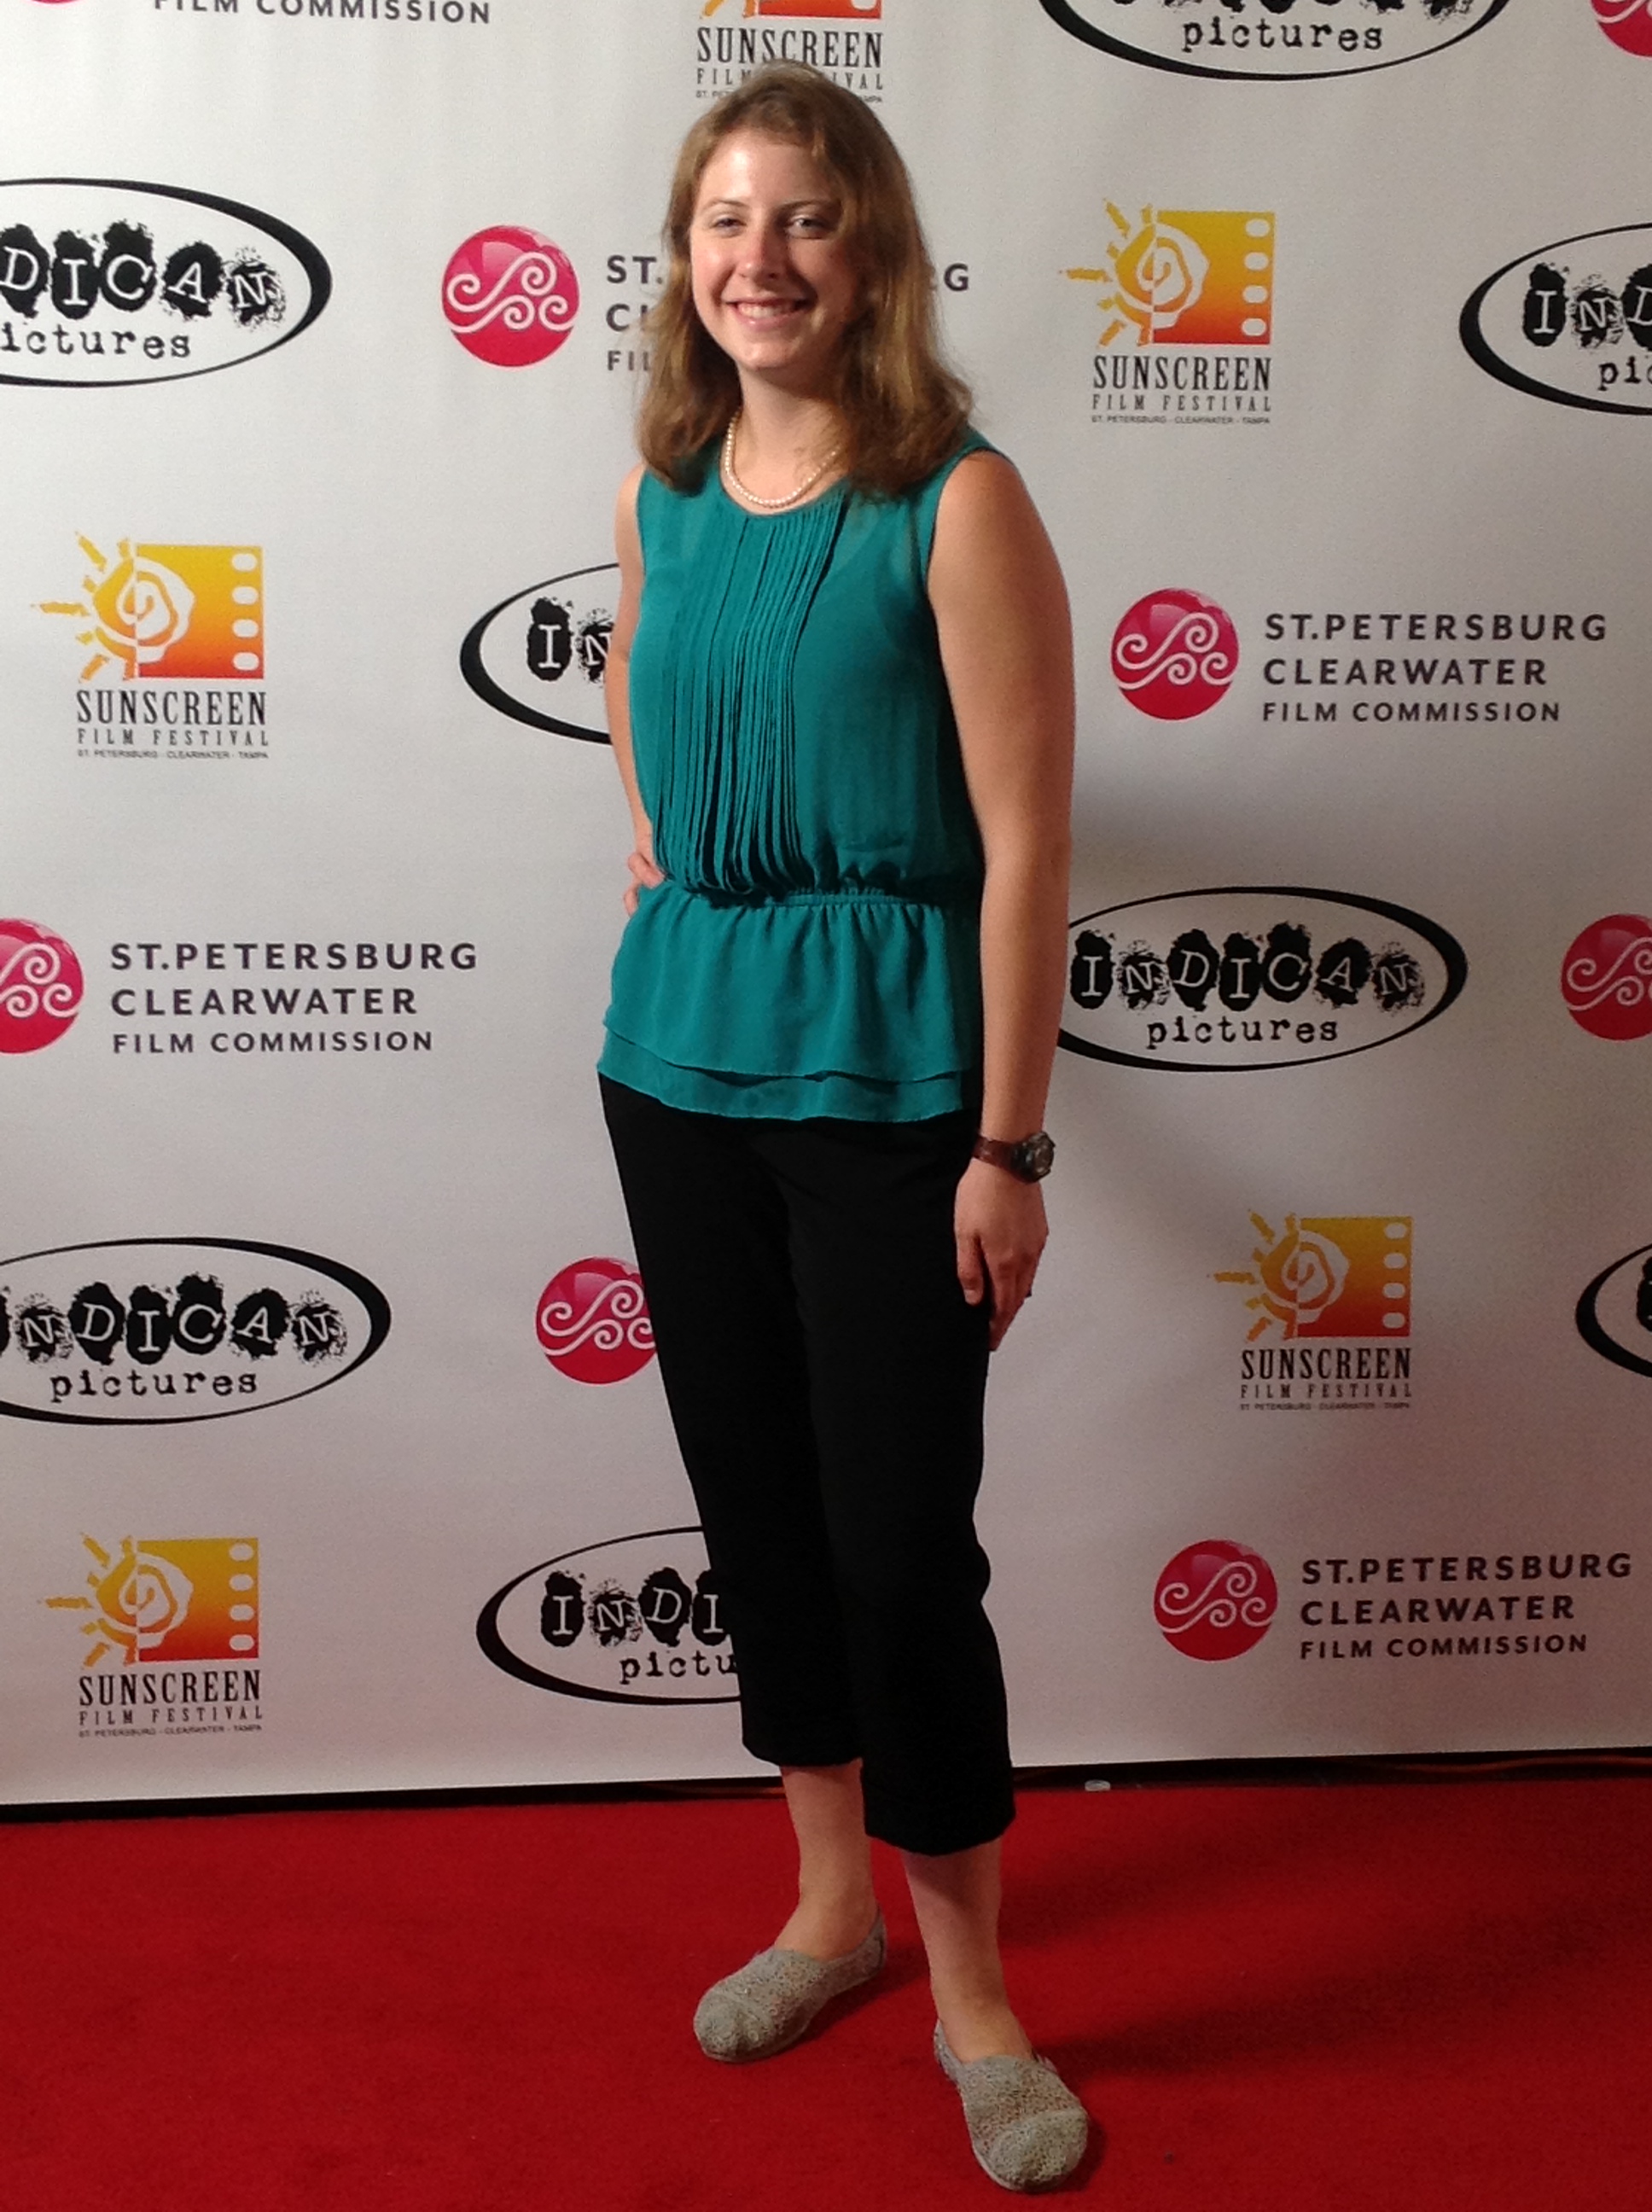 Carly at Sunscreen Film Festival West in Los Angeles